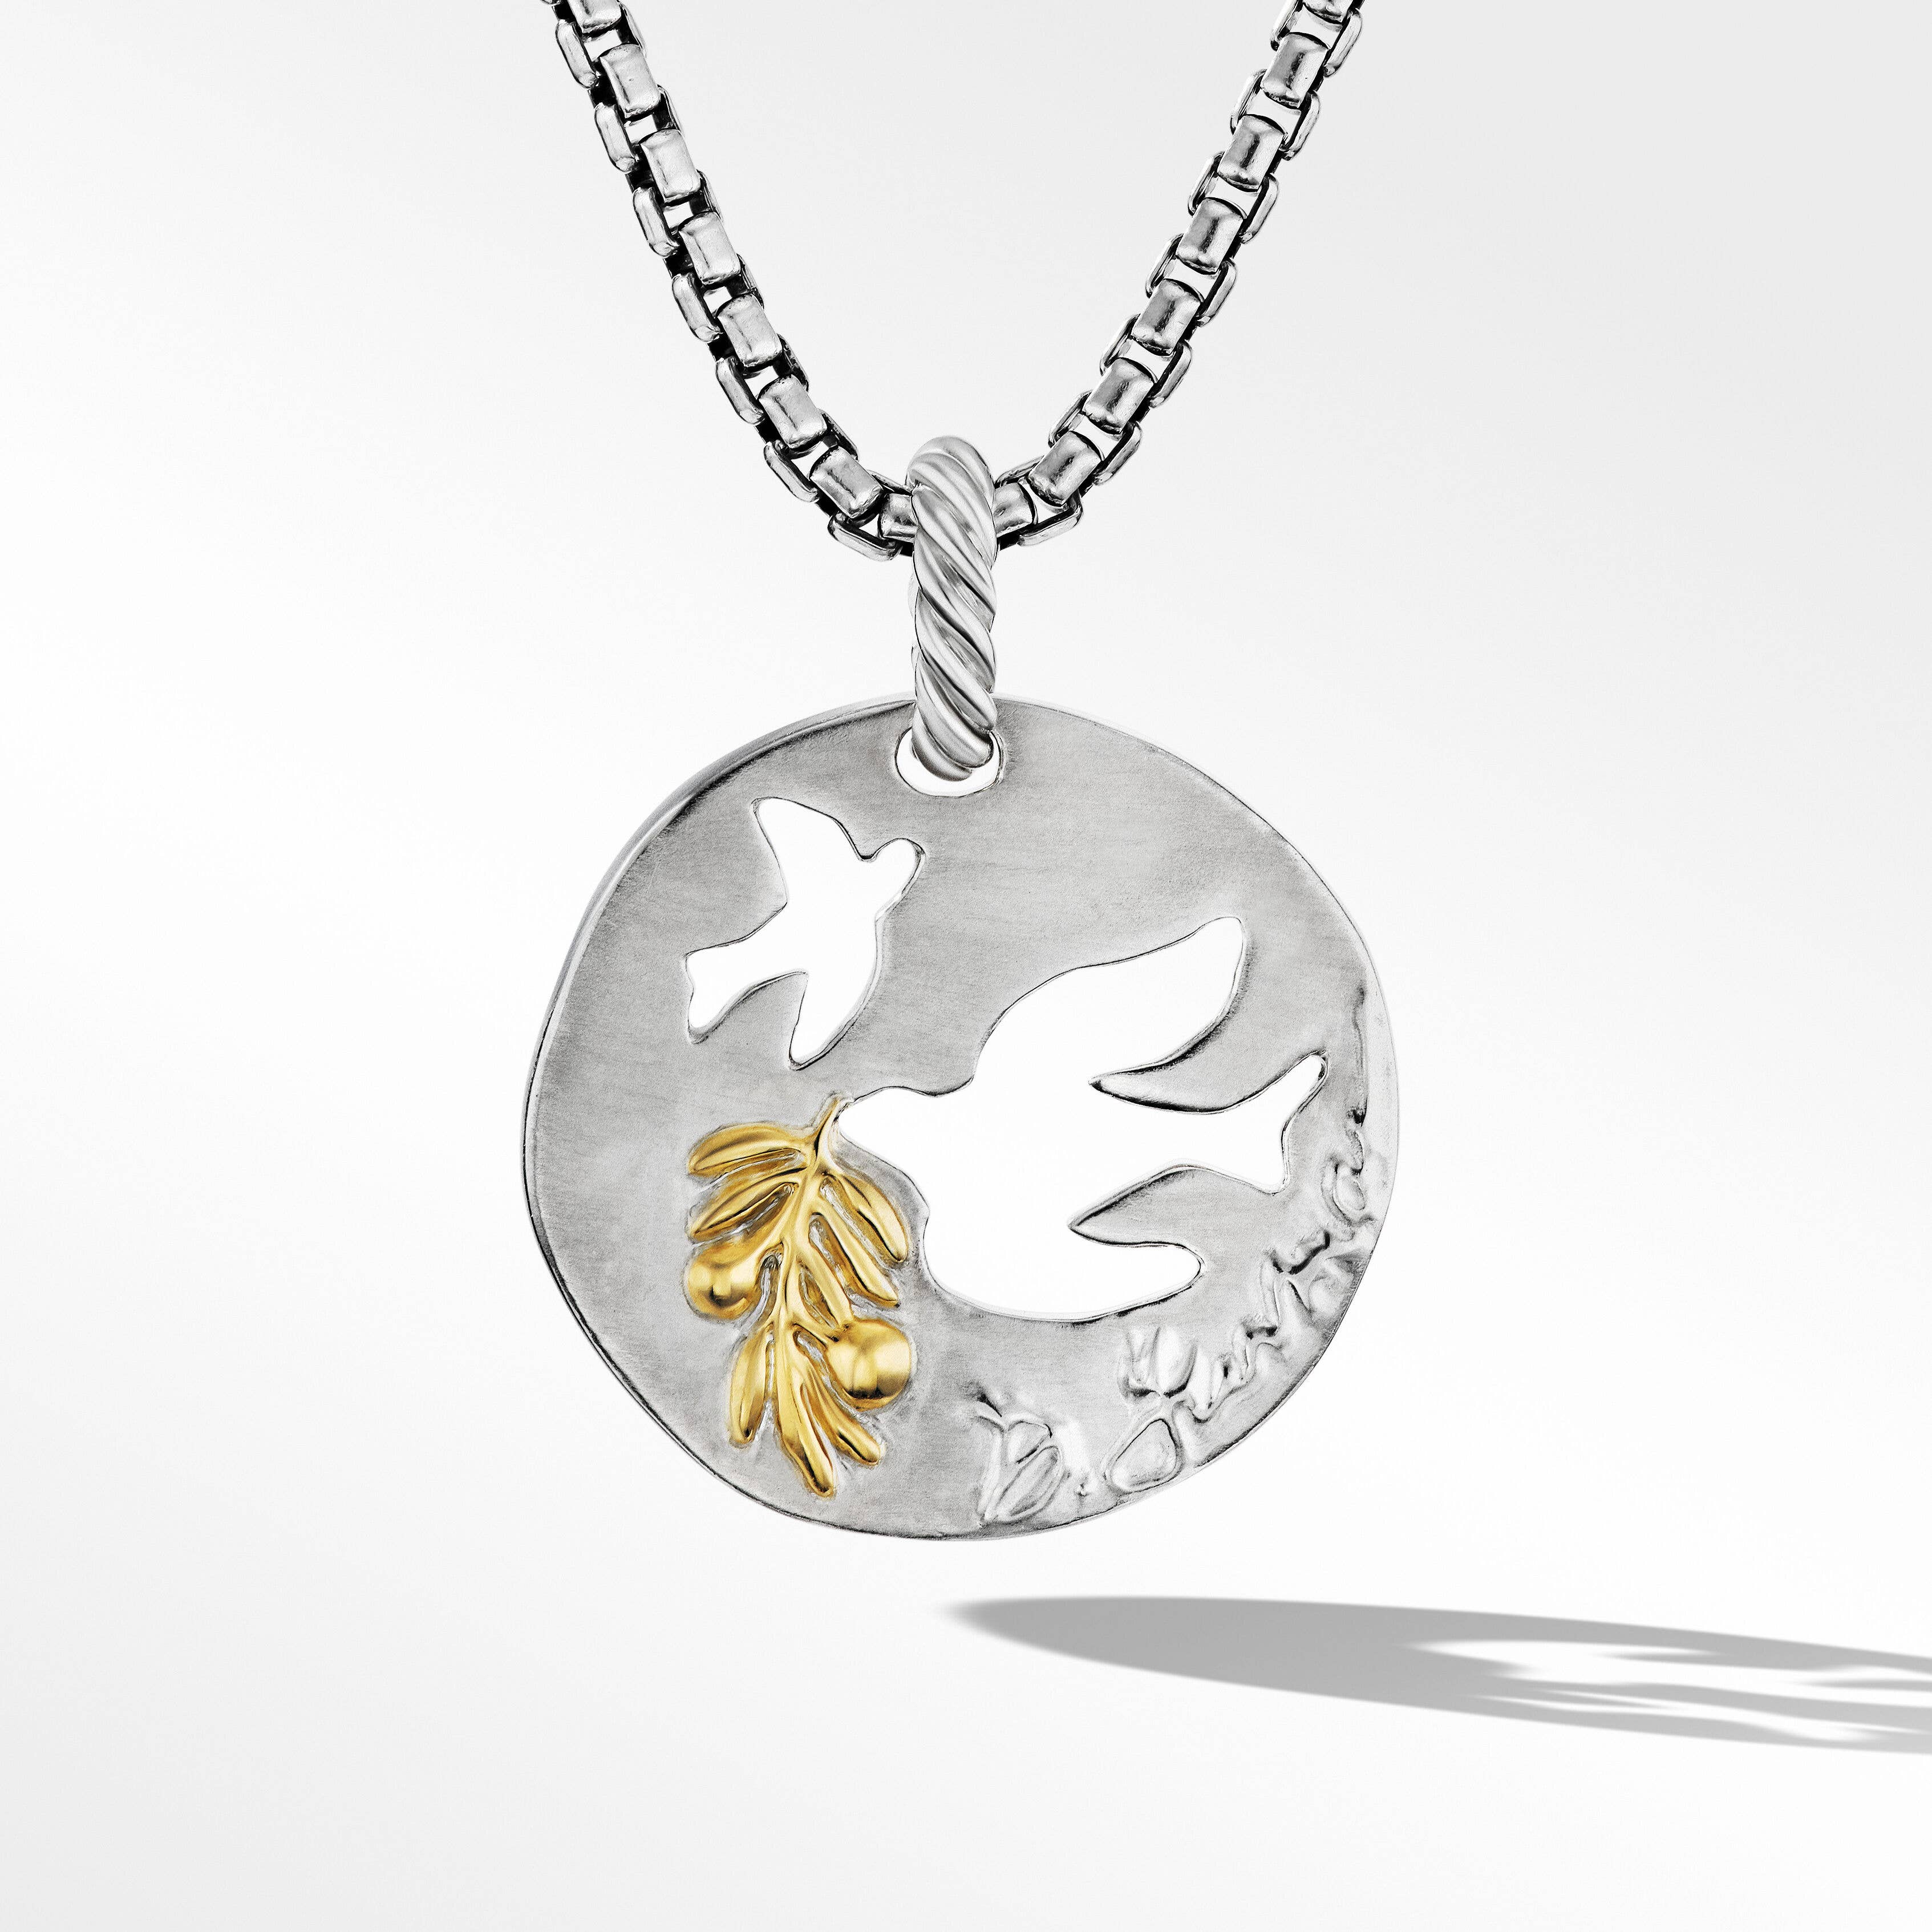 DY Elements® Dove Pendant in Sterling Silver with 18K Yellow Gold